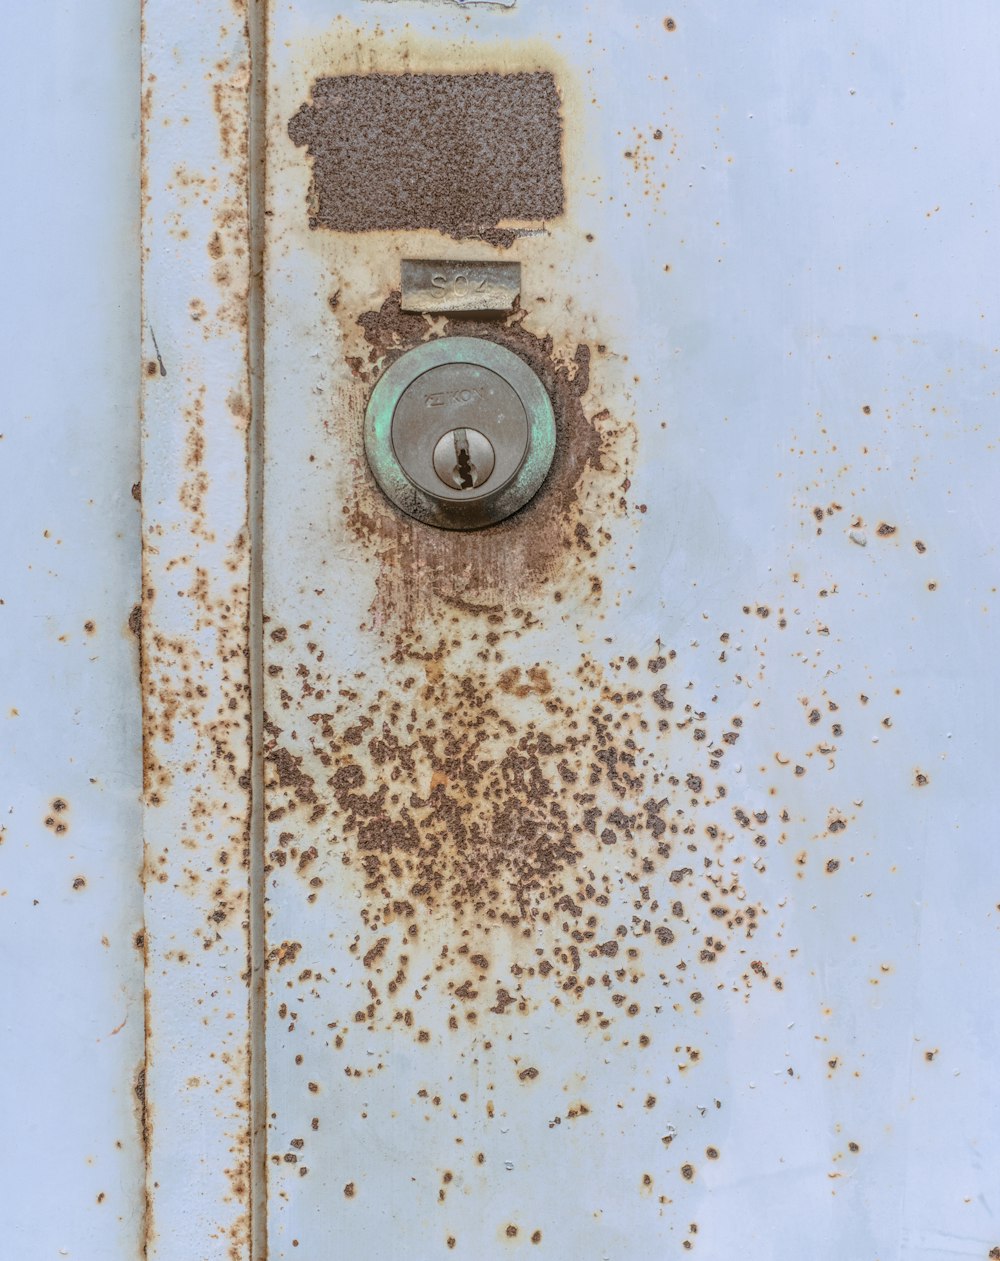 a rusted metal door with a button on it